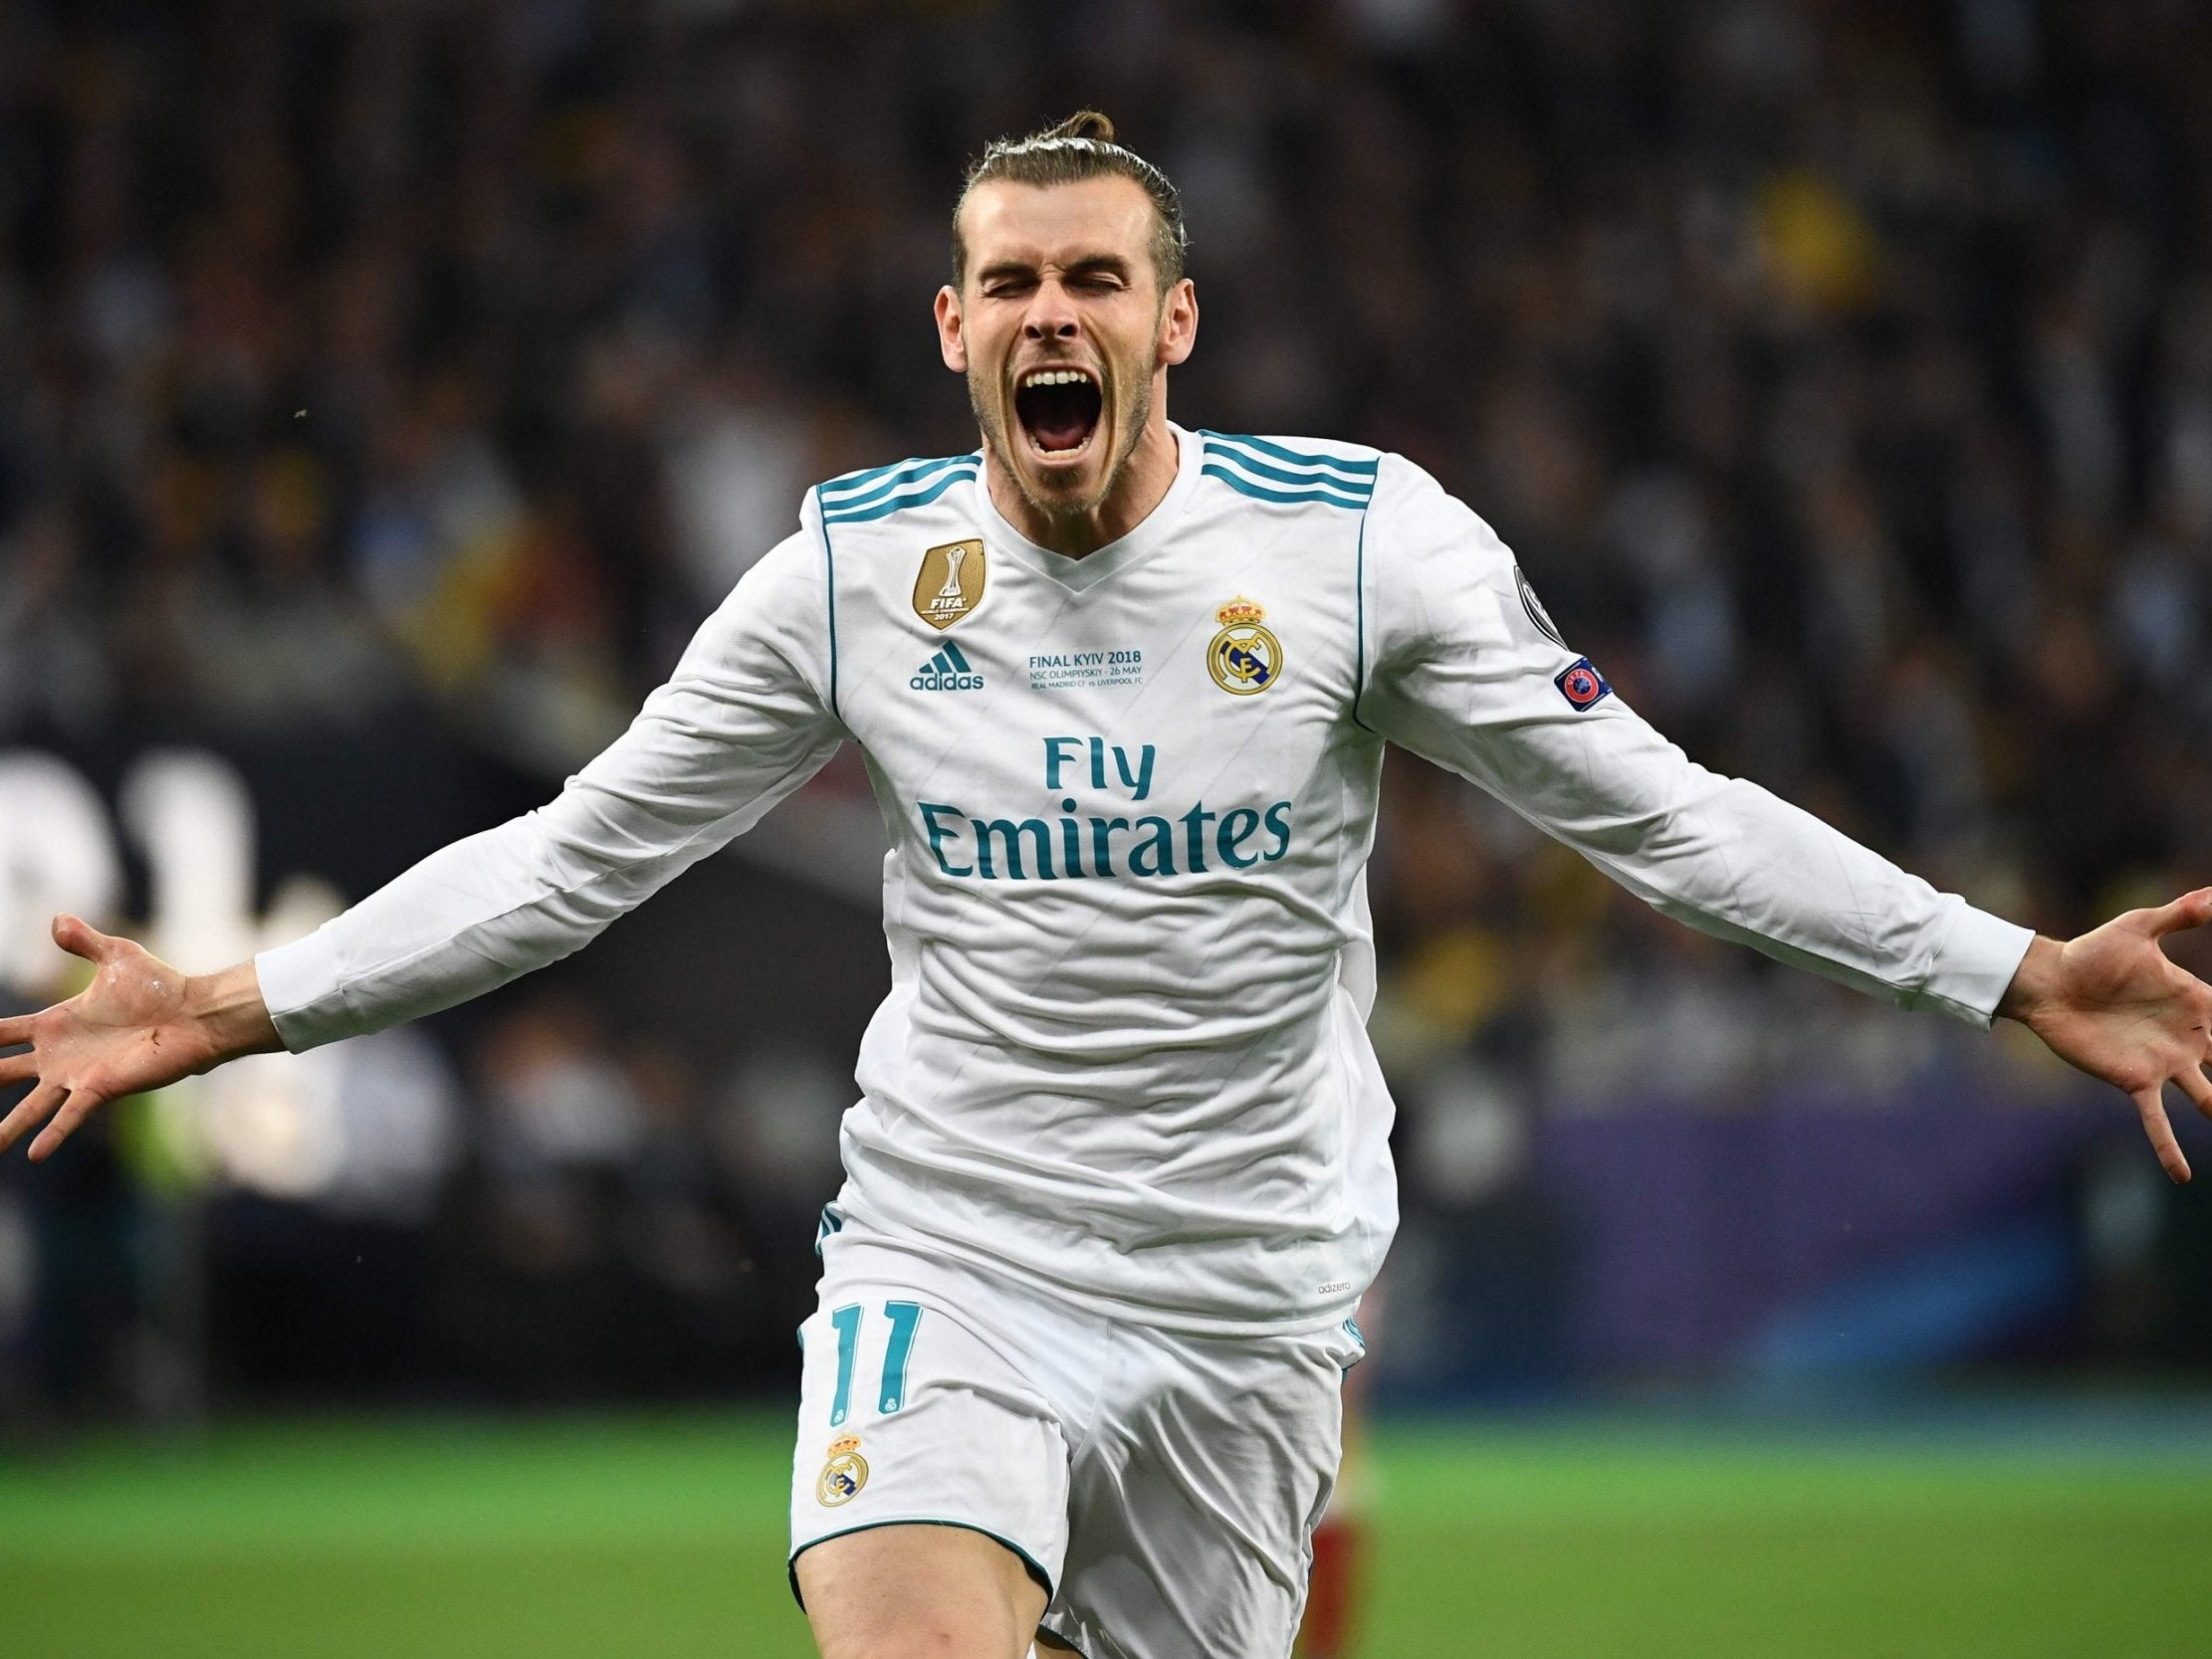 Manchester United have renewed their efforts to sign Gareth Bale from Real Madrid